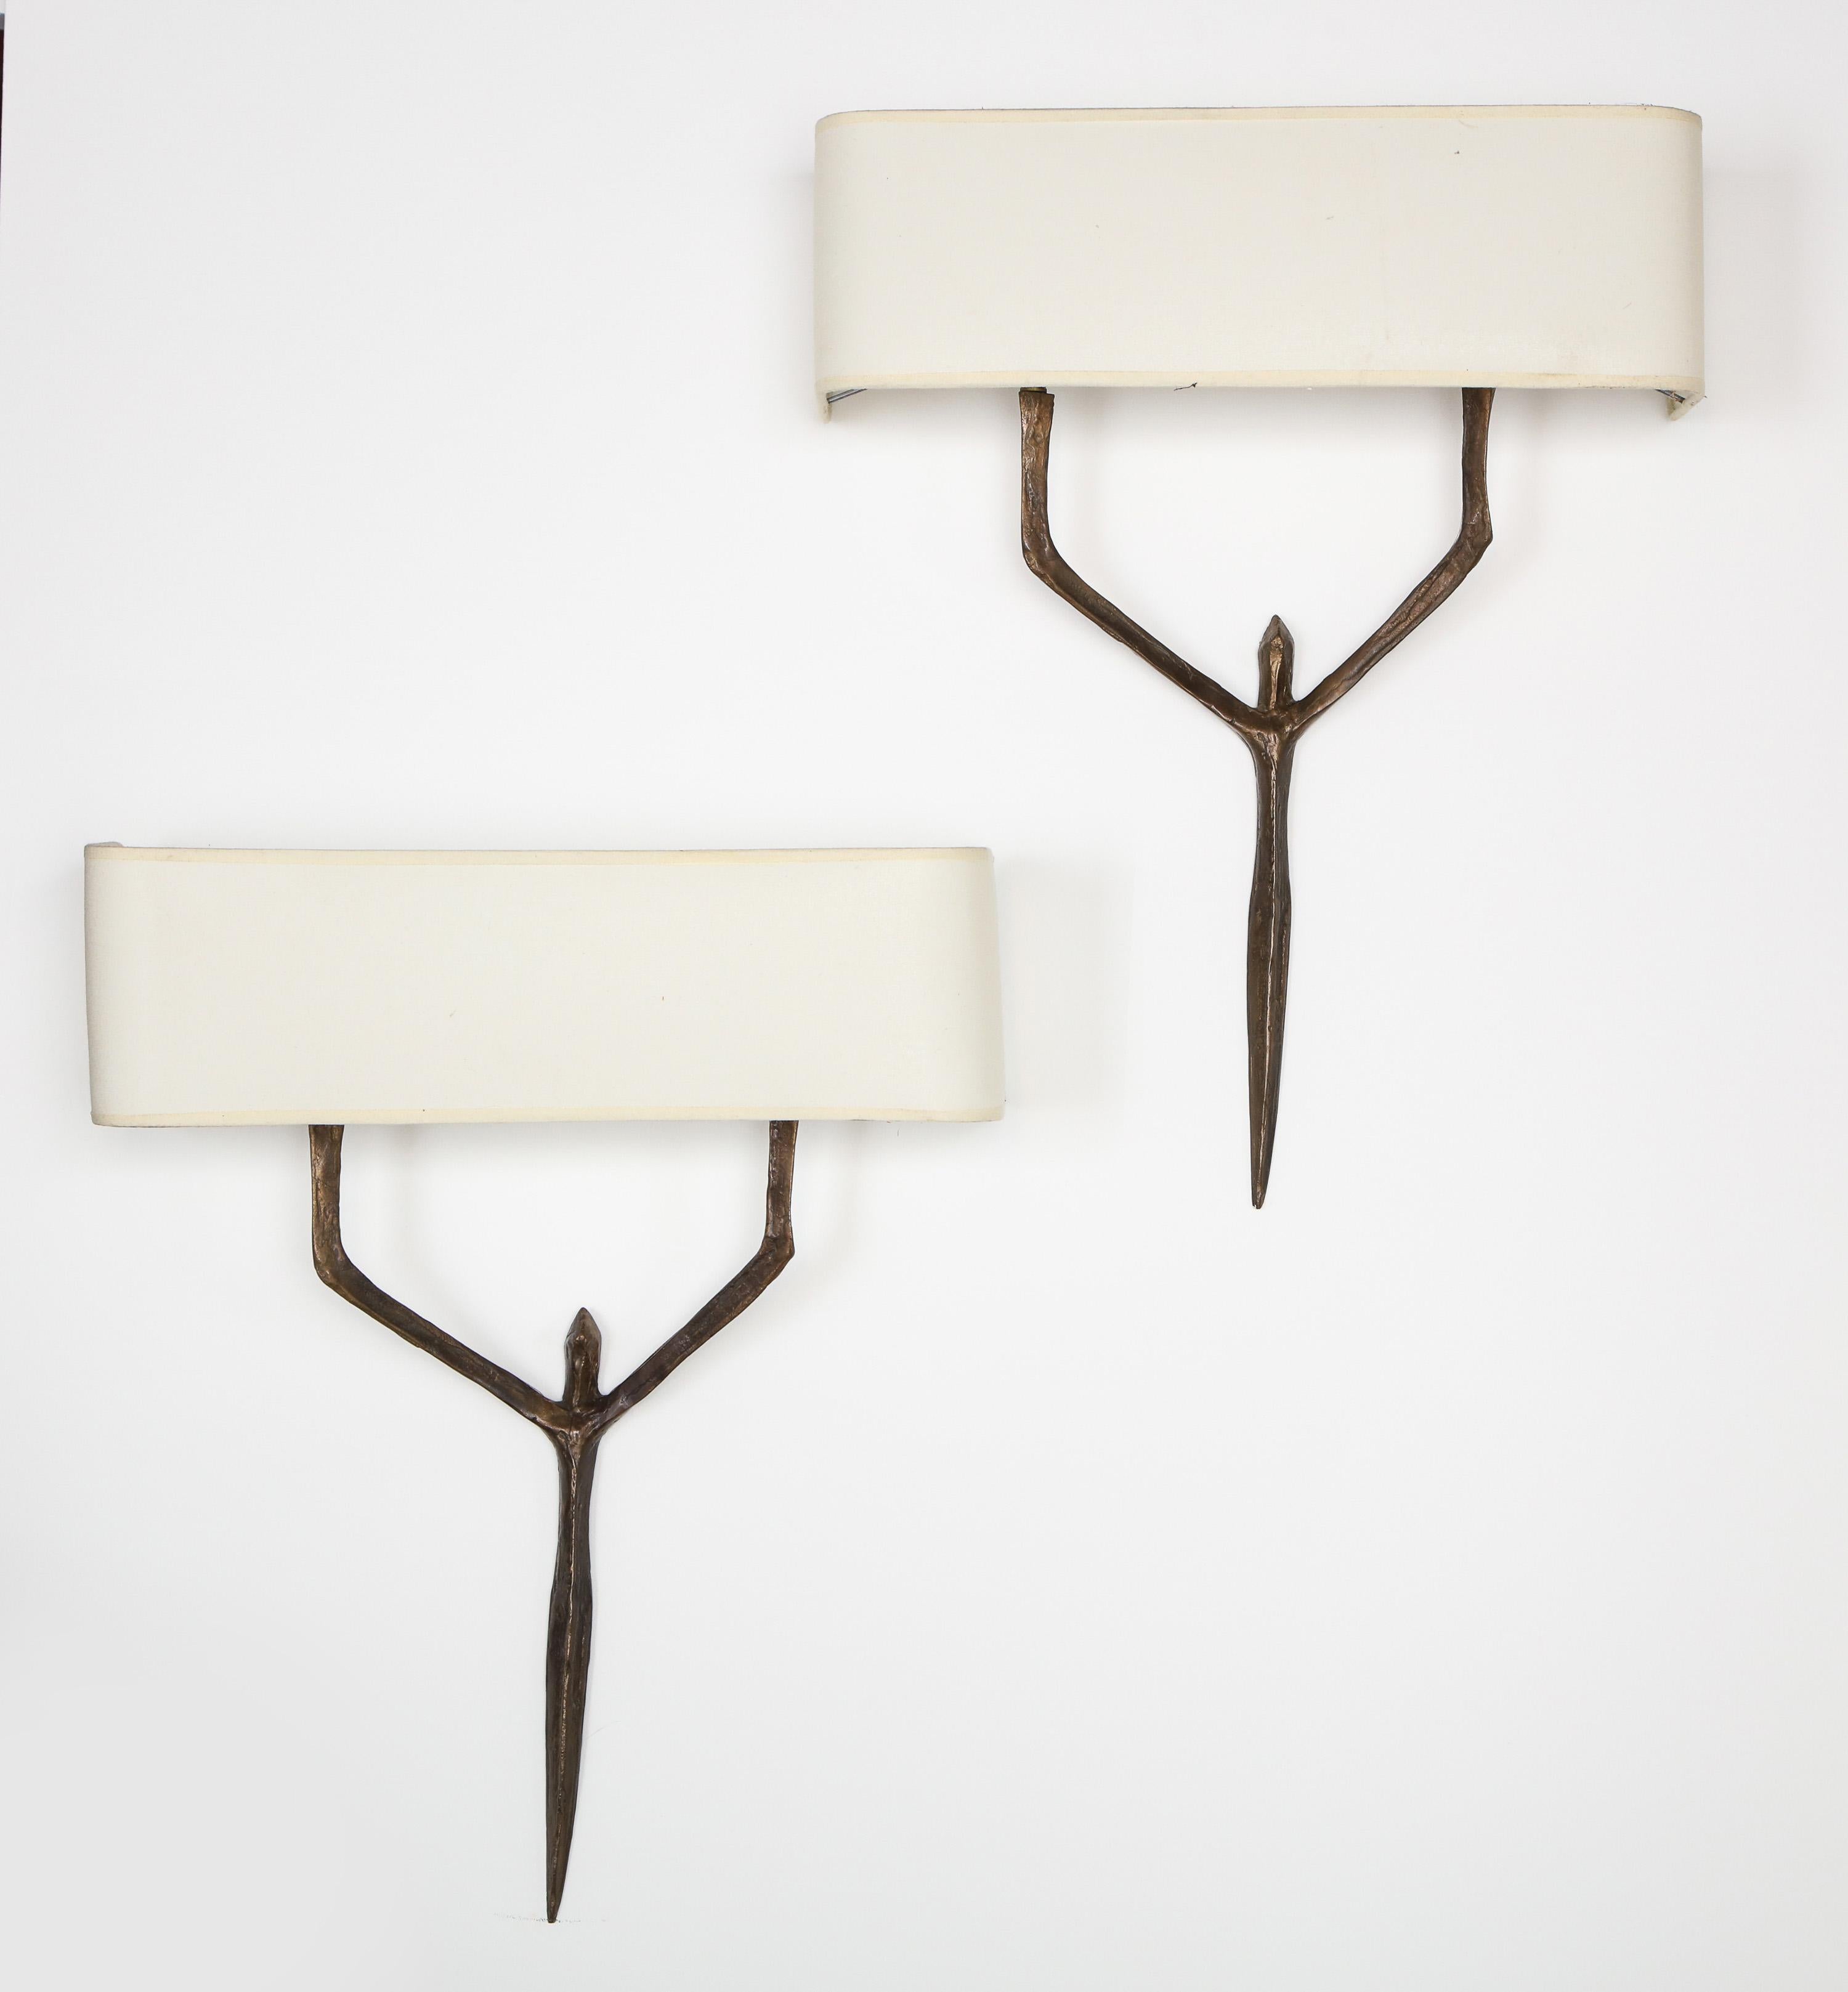 Pair of bronze cariatide sconces by Felix Agostini, France, 1950s.